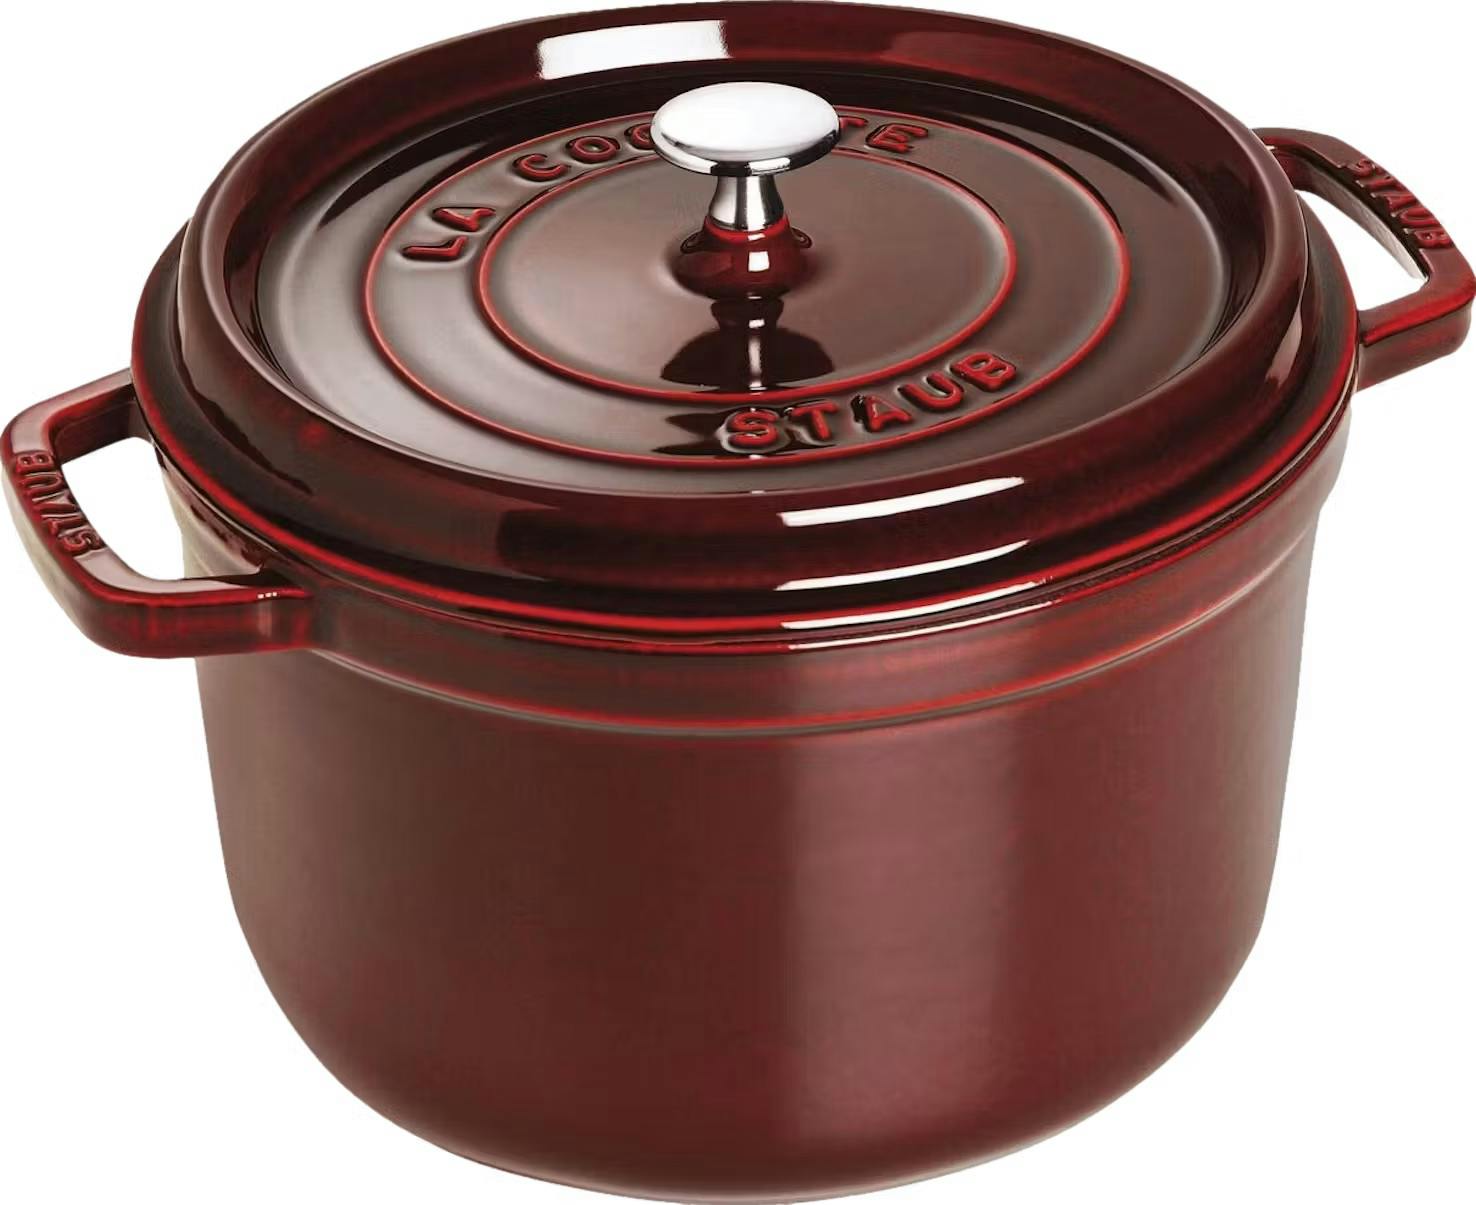 An Expert Guide to Staub Dutch Ovens & Cocottes